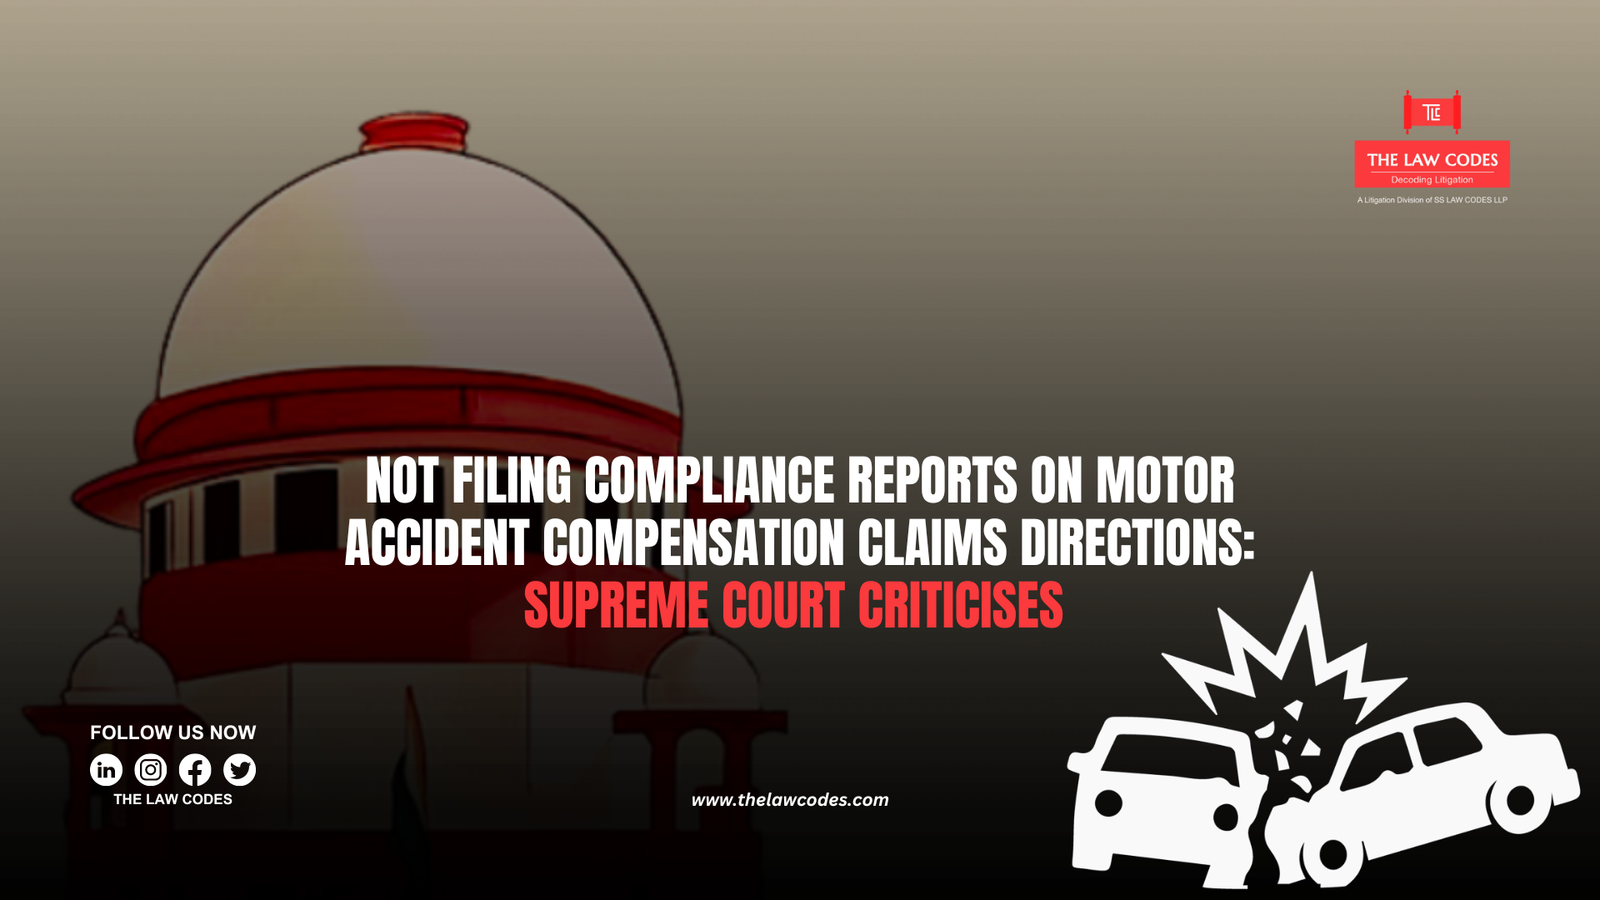 The Supreme Court Criticises States and High Courts for Not Filing Compliance Reports on Motor Accident Compensation Claims Directions.